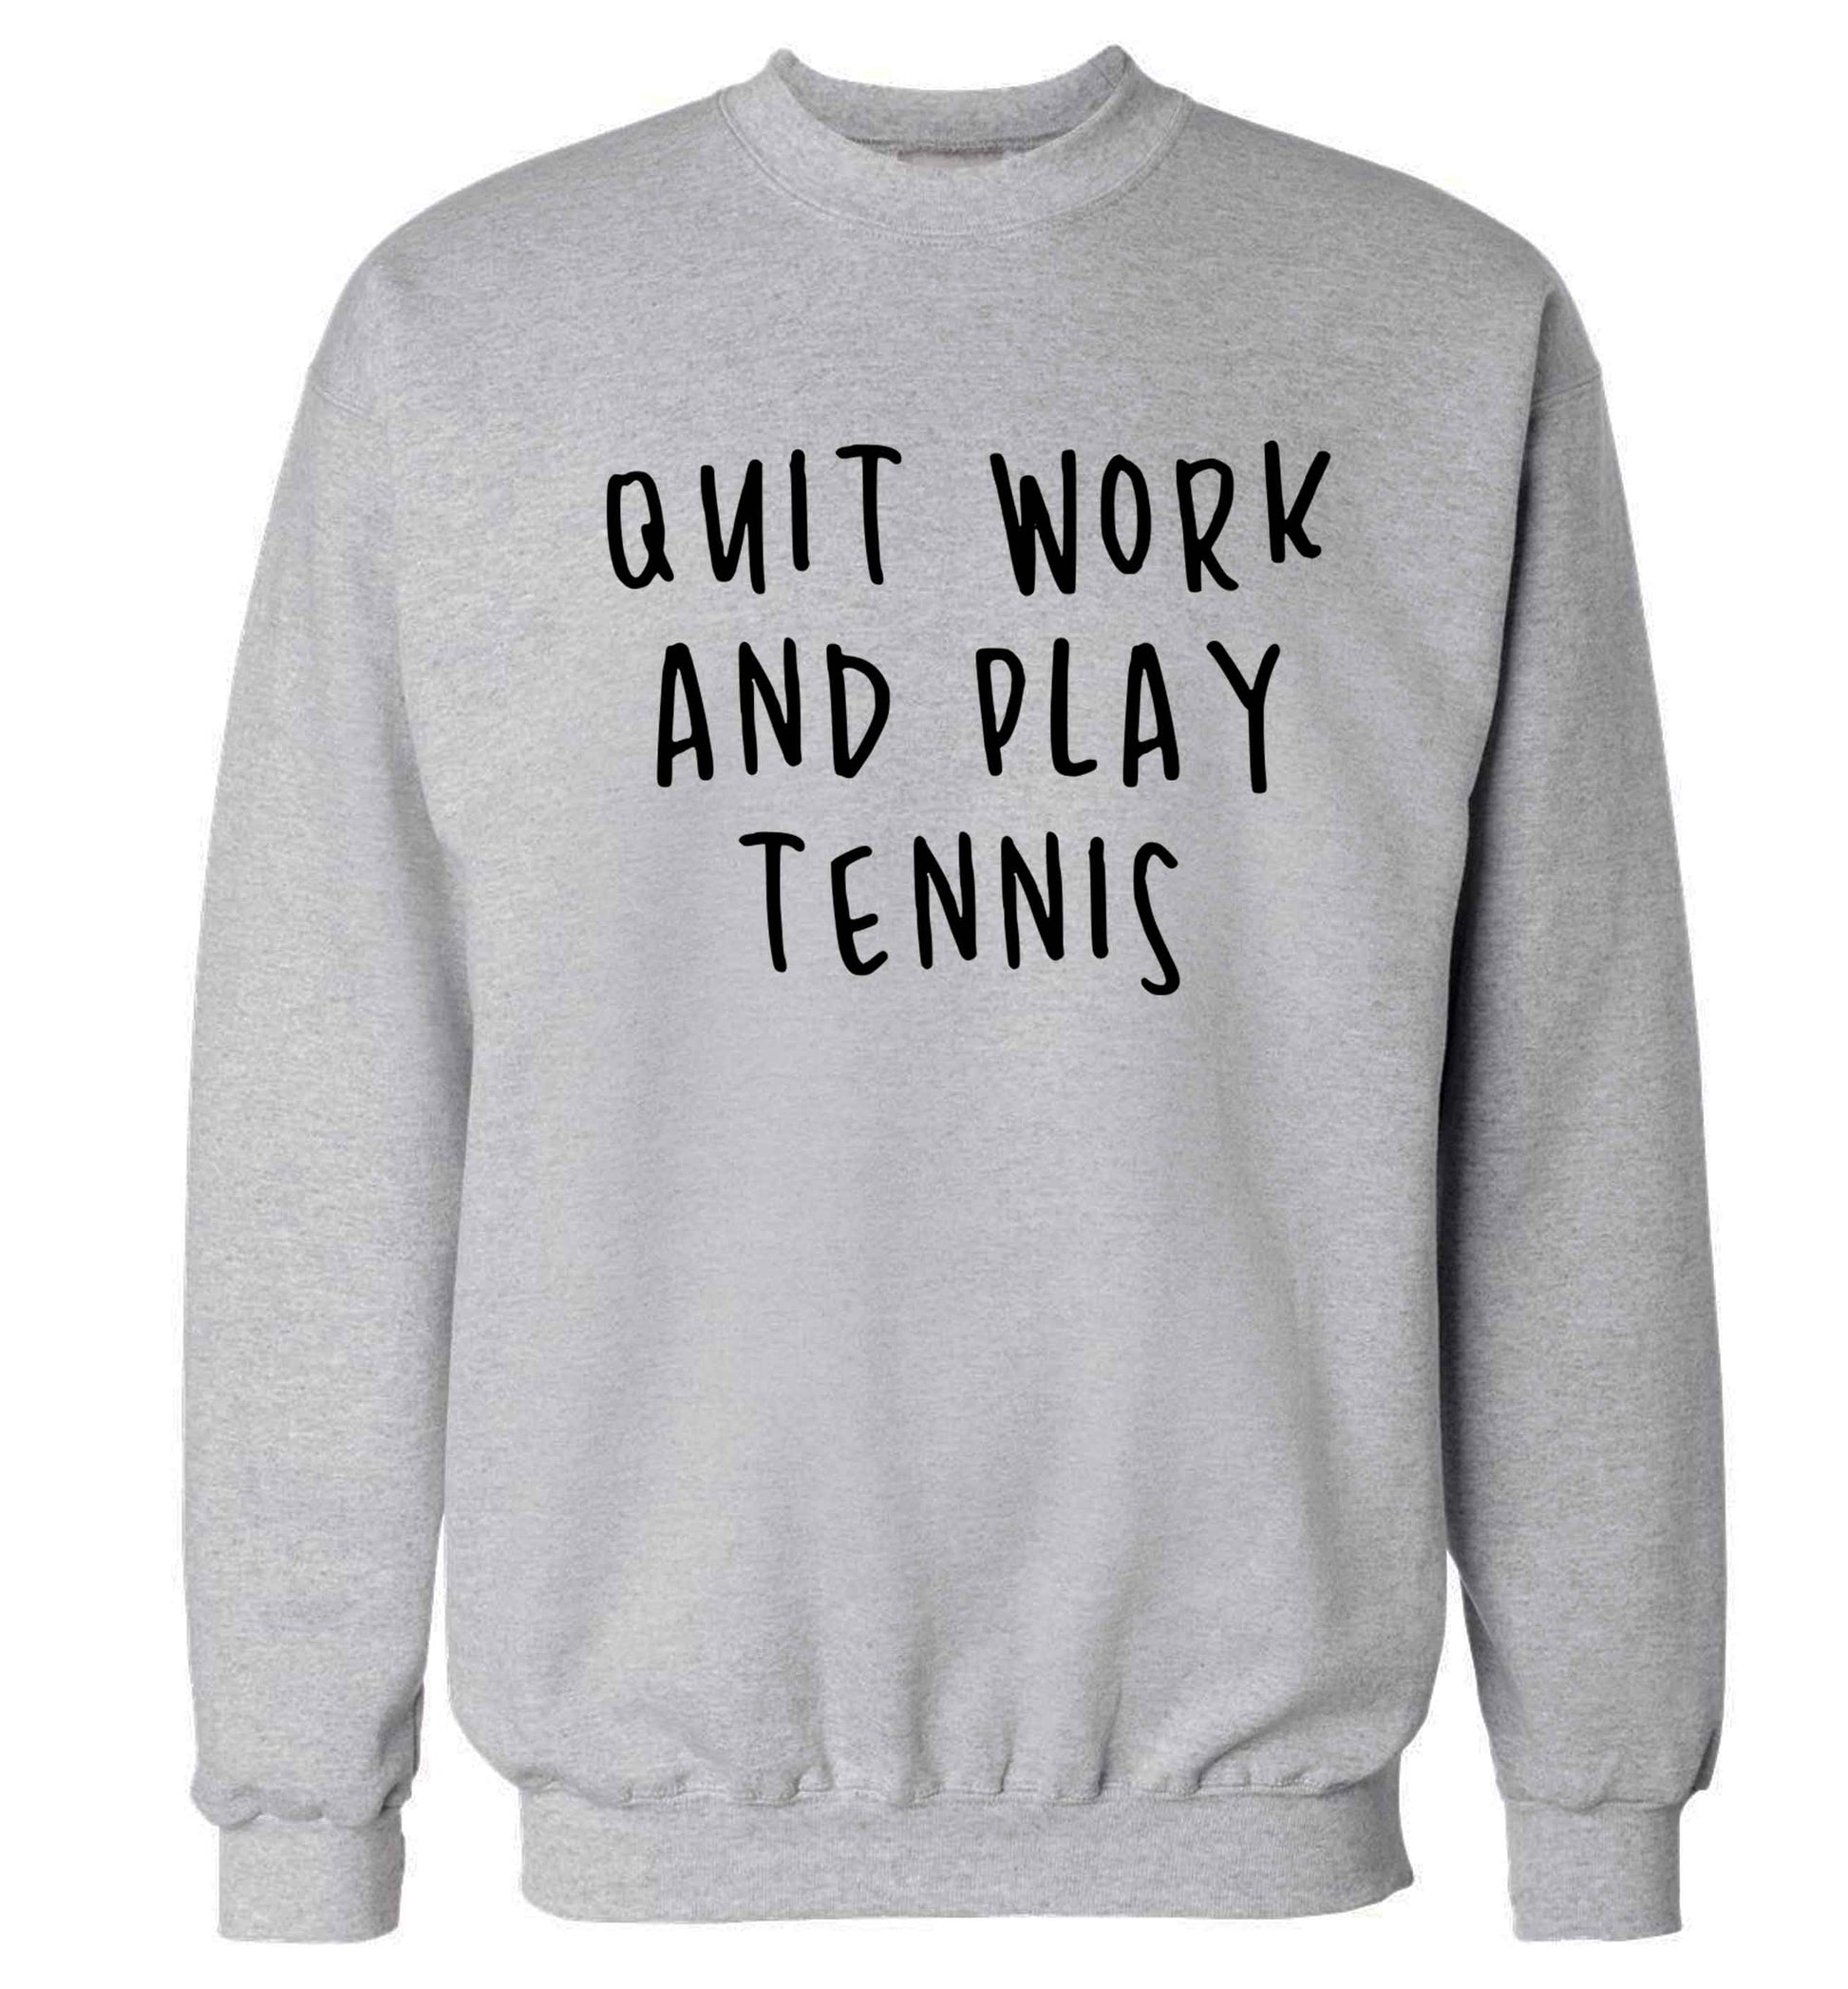 Quit work and play tennis Adult's unisex grey Sweater 2XL